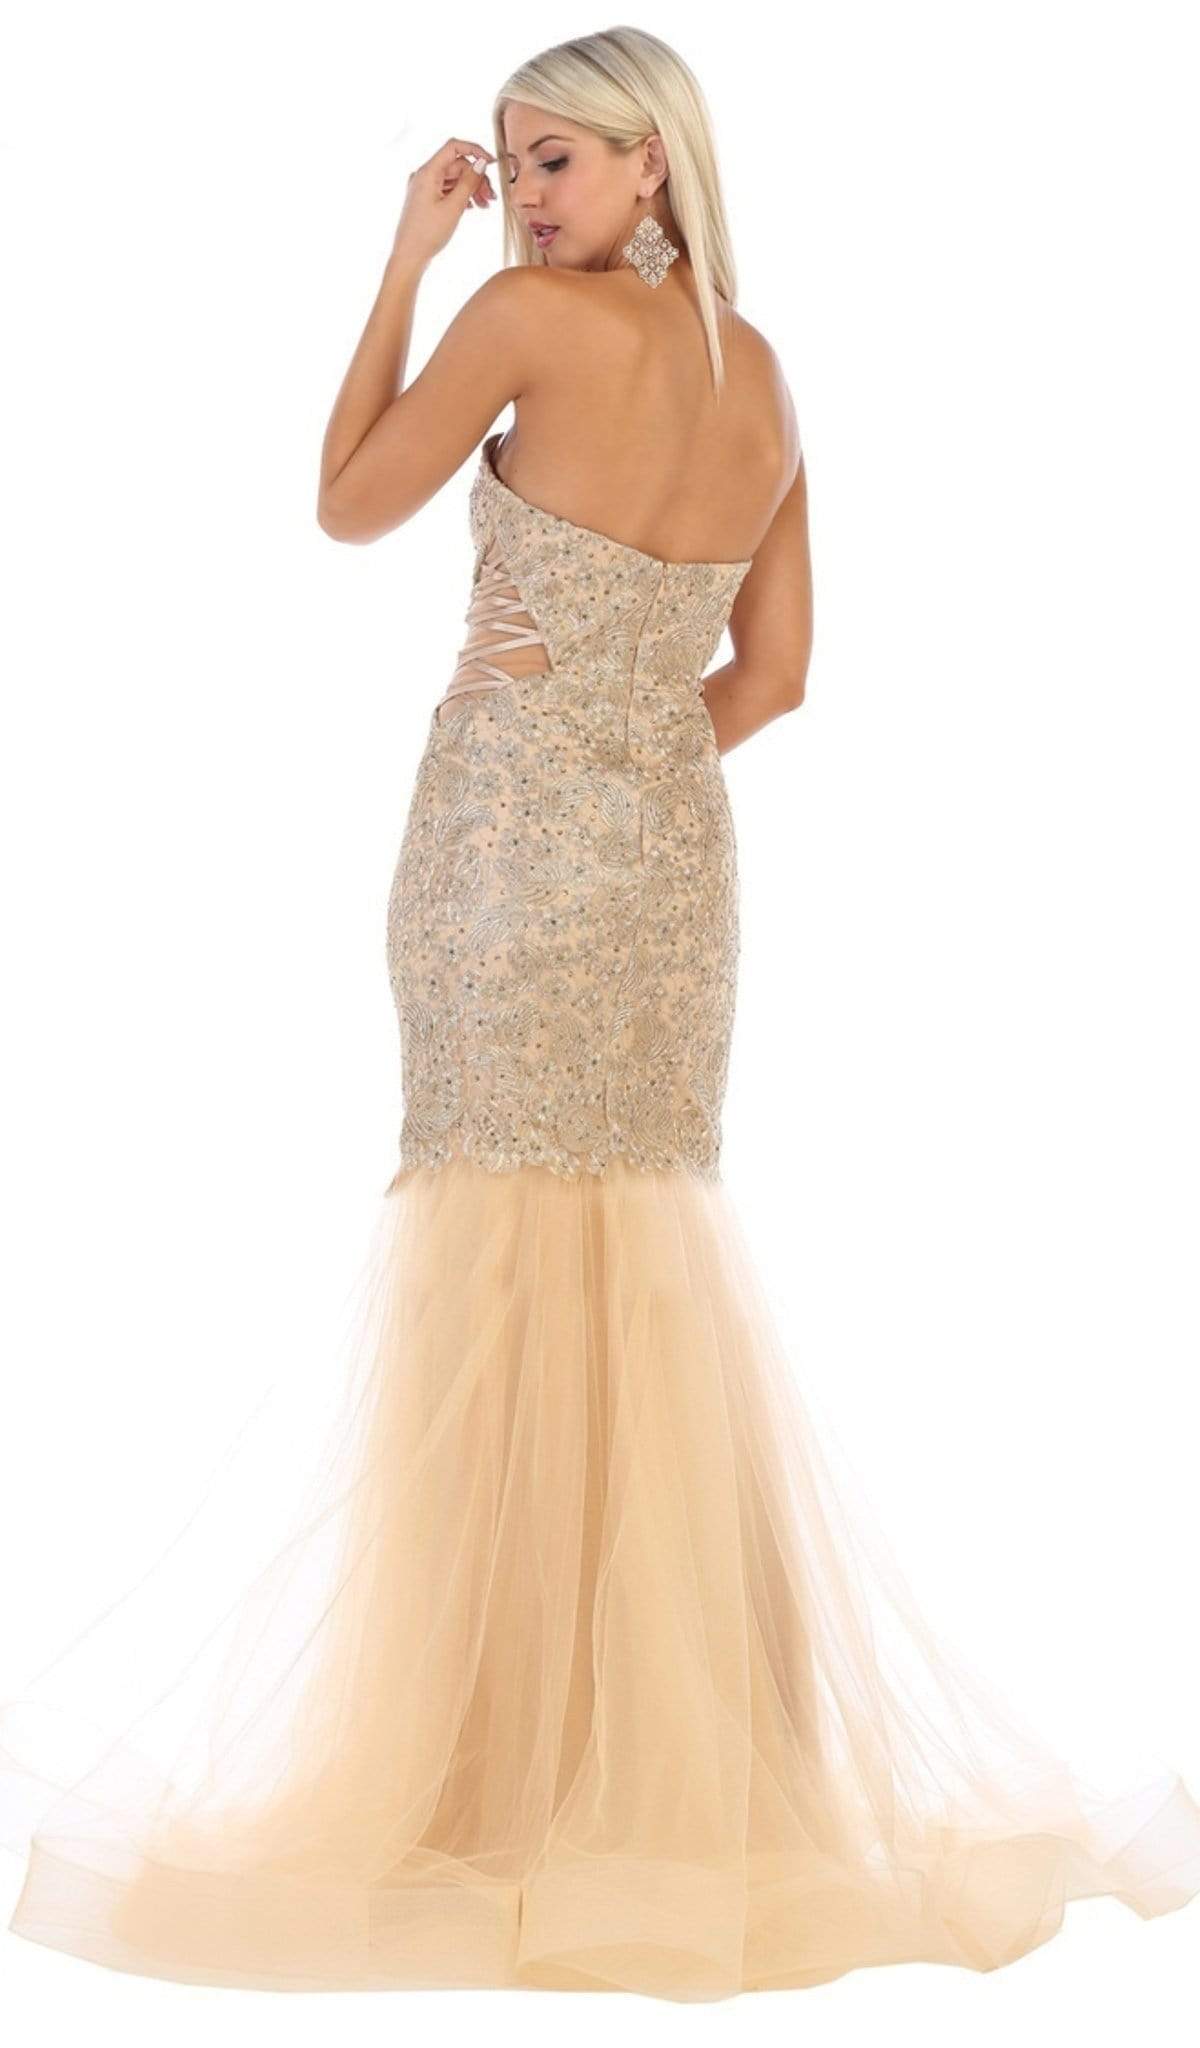 May Queen - RQ7682 Embellished Deep Sweetheart Mermaid Dress Special Occasion Dress